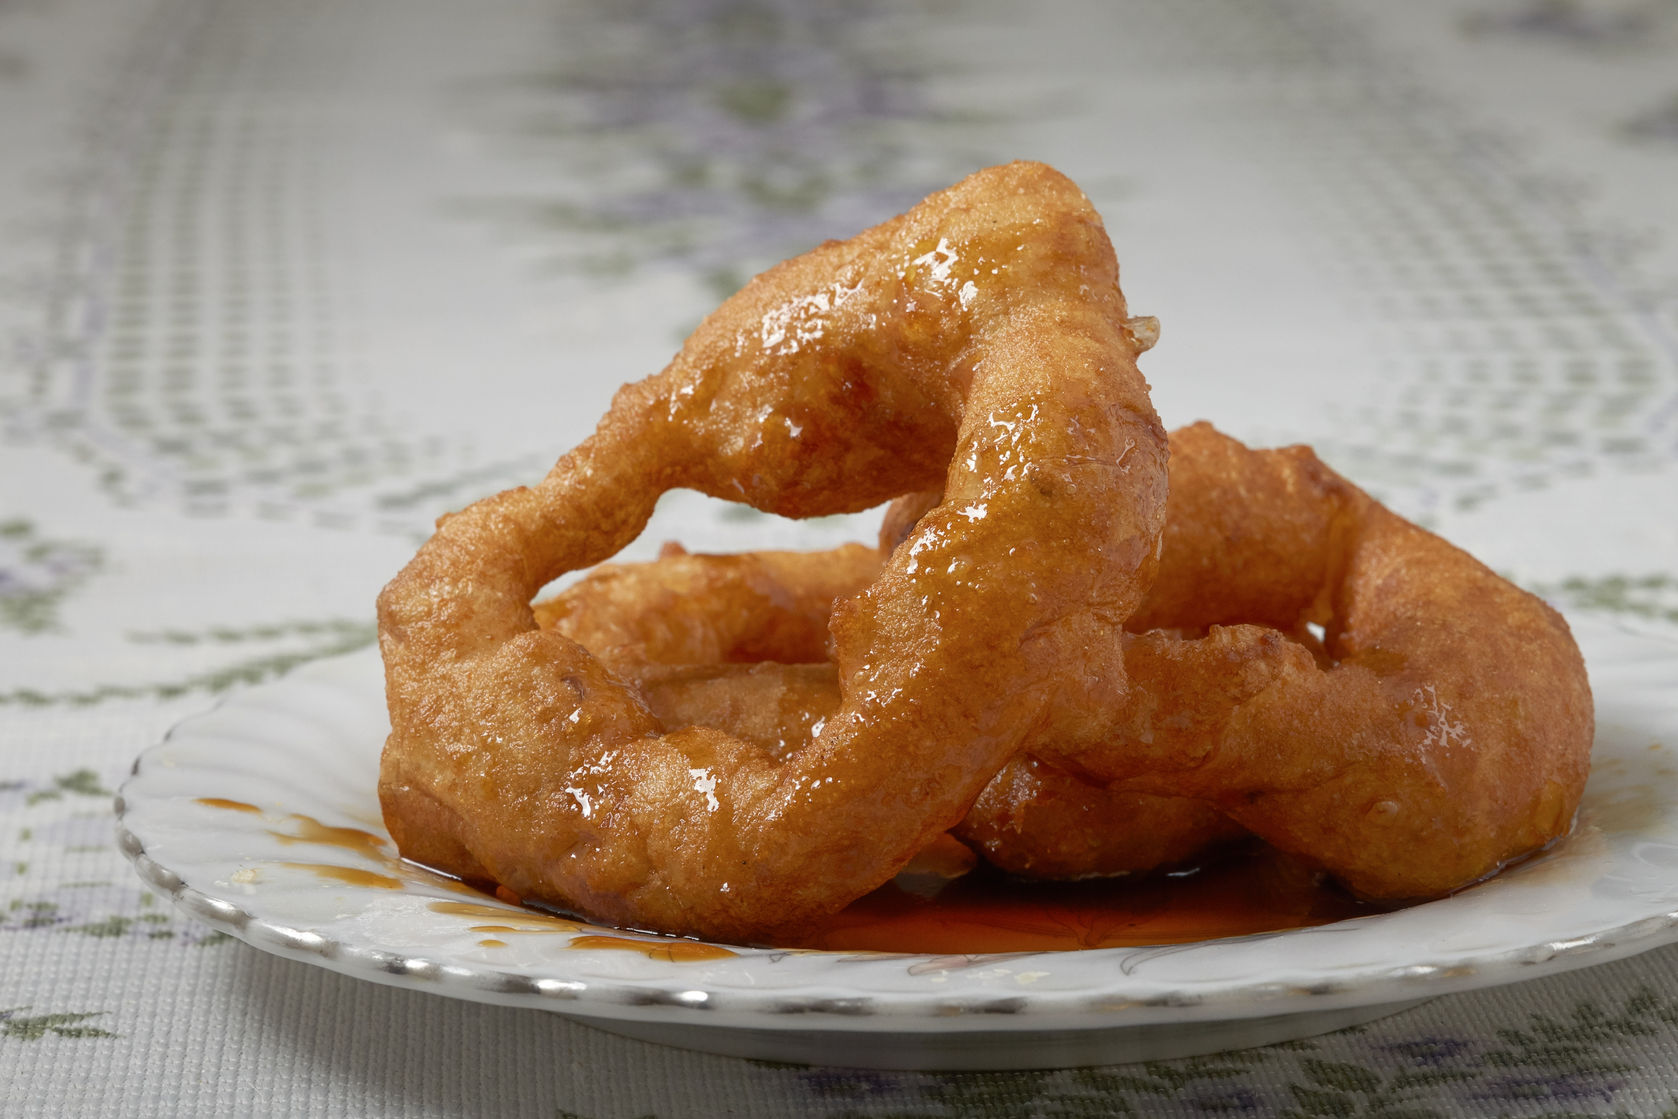 59141353 - traditional peruvian dessert picarones. made of sweet potato, pumpkin and wheat flour. fried an served whit honey figs.